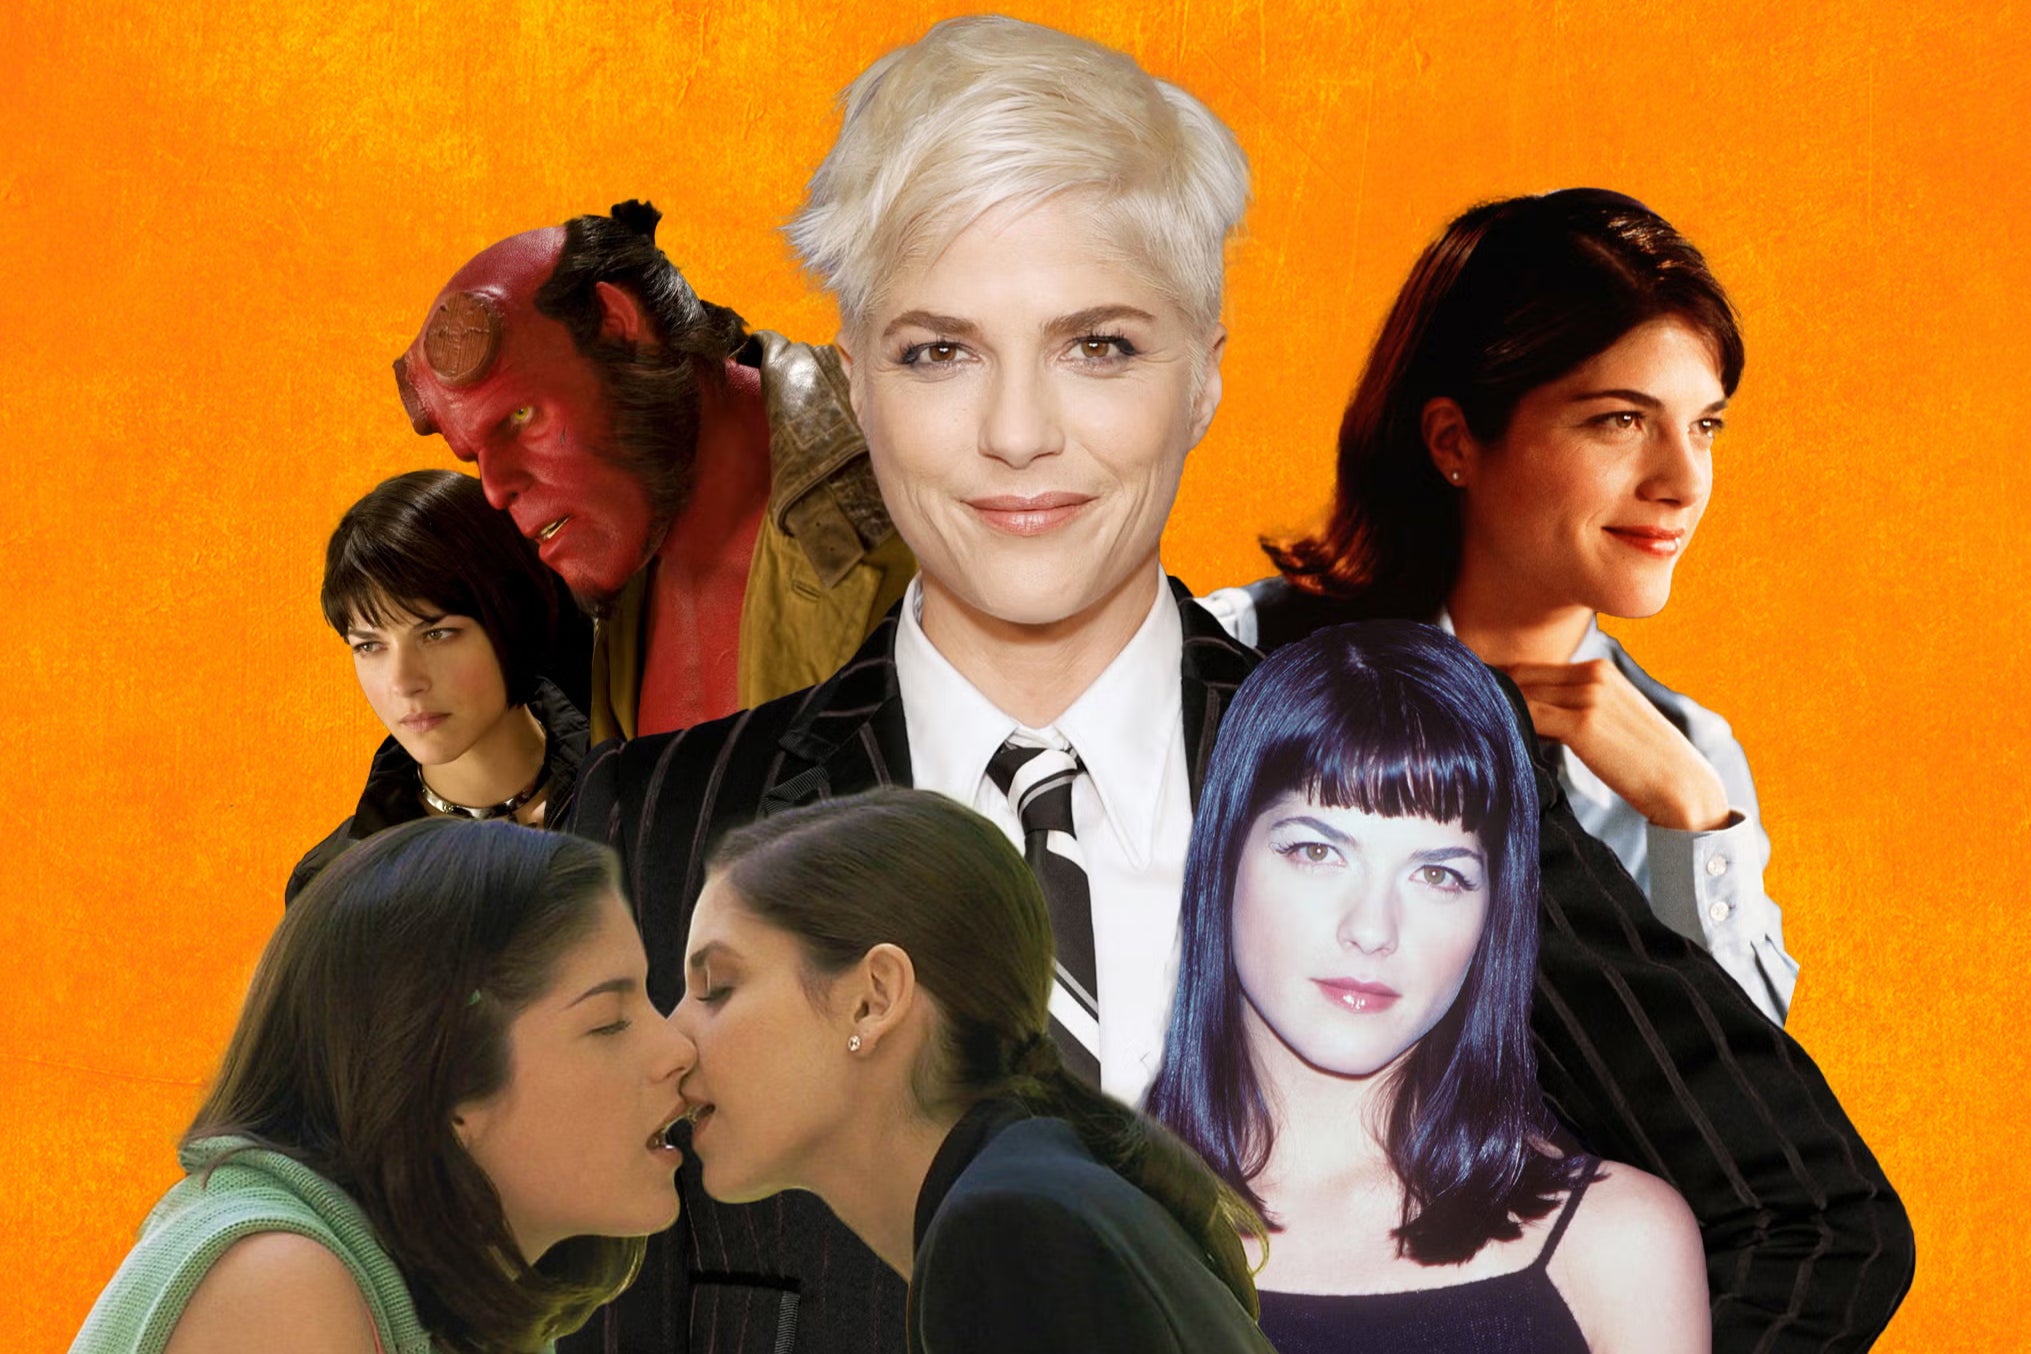 Selma Blair in 2021 (centre) and (clockwise from top right) in ‘Legally Blonde’, at a film premiere in 1999, in ‘Cruel Intentions’ and in ‘Hellboy II: The Golden Army'